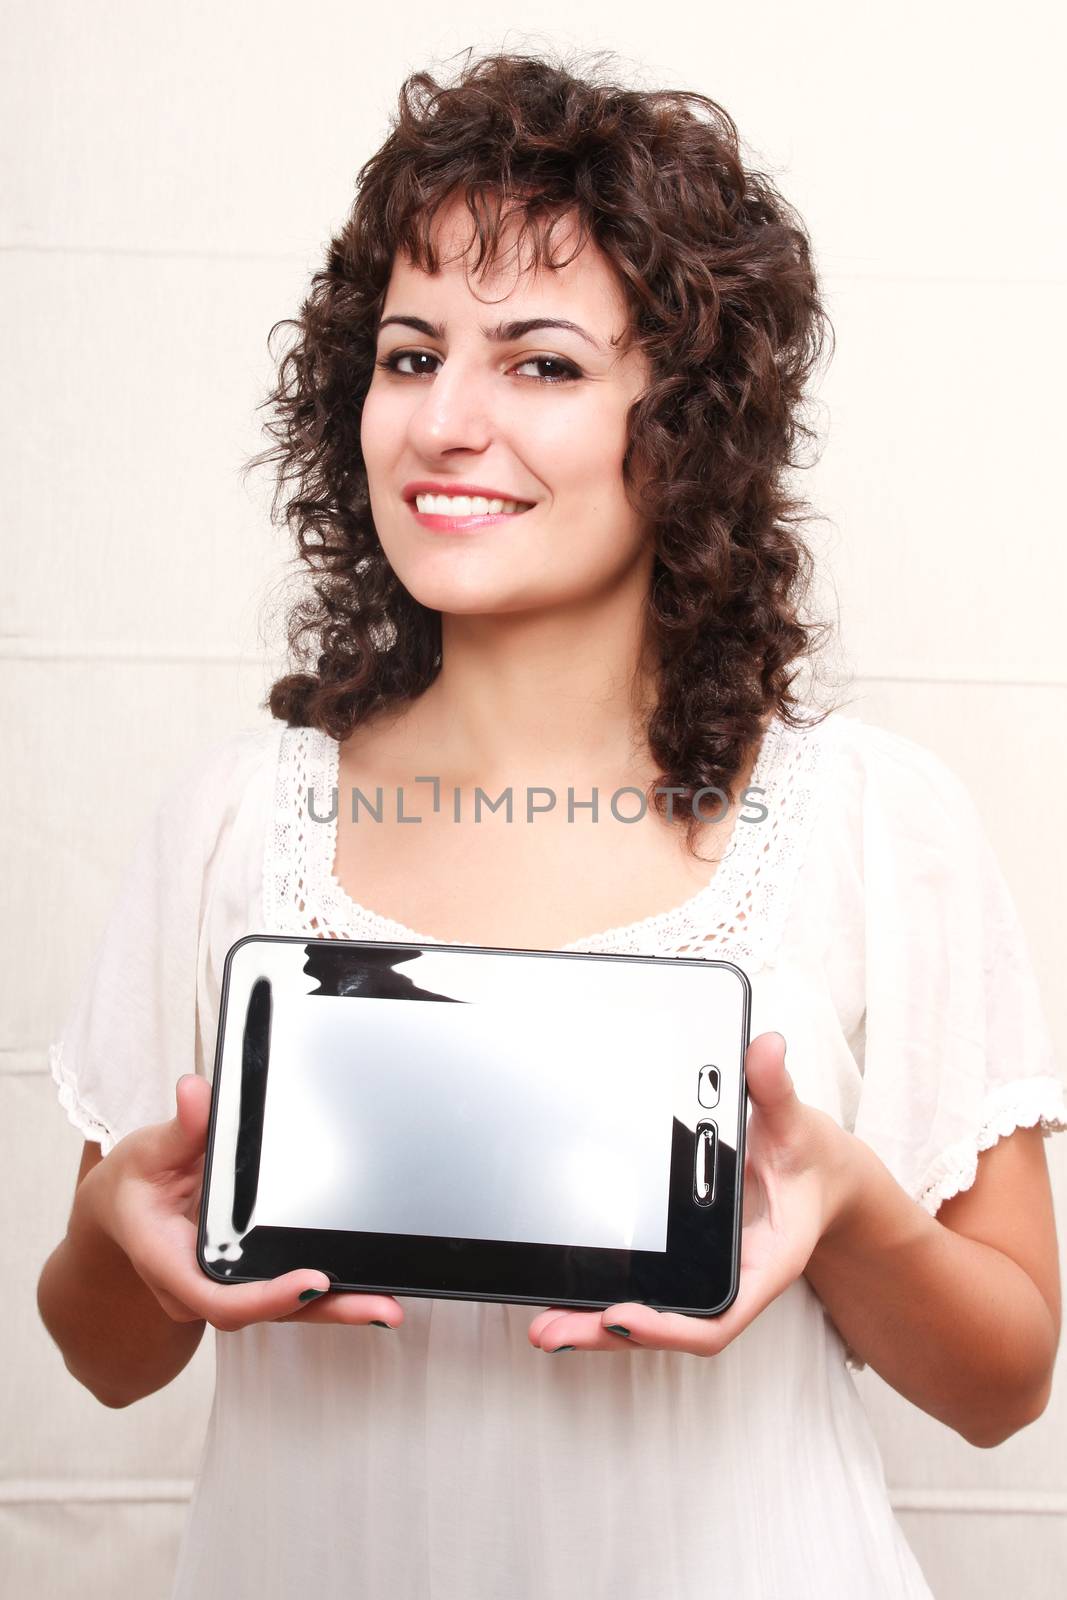 A young woman holding a Tablet PC.